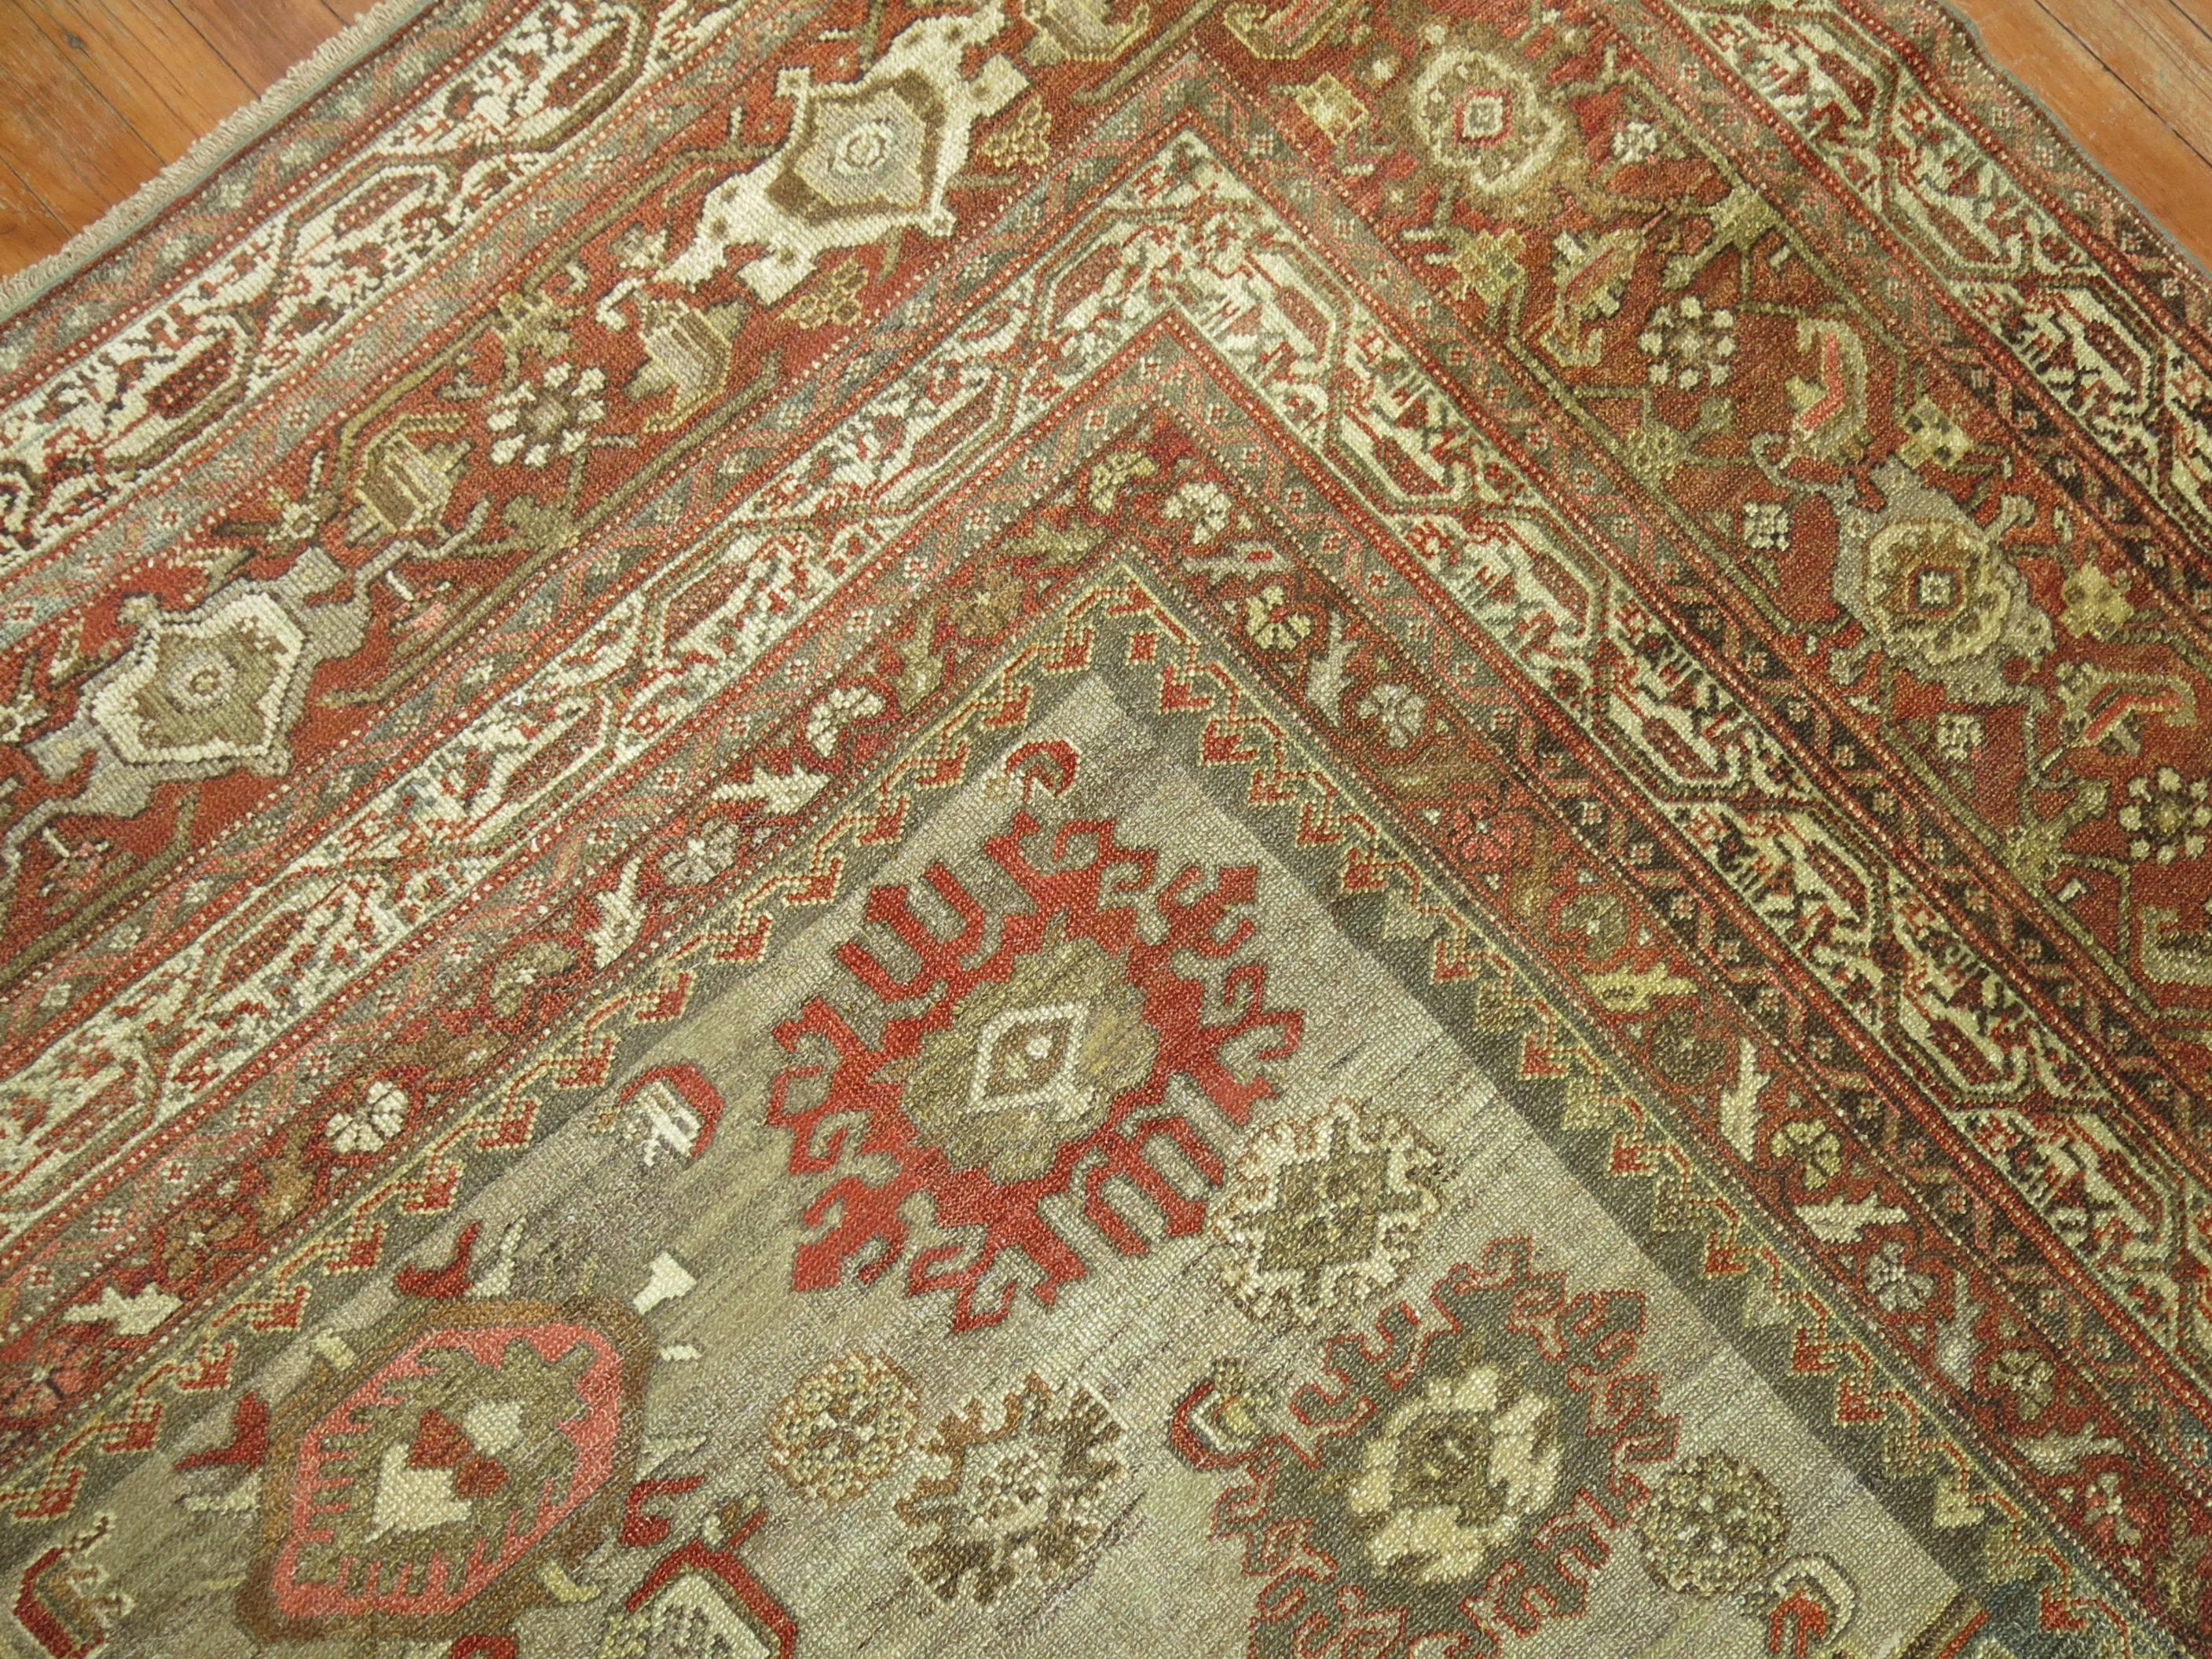 Stunning room size Persian Malayer with a rare silver-gray field color.
Malayer is a village located in Northwest Persian knows for decorative style rugs usually with geometric stylized motifs. Persian Malayer rugs are typically found in scatter